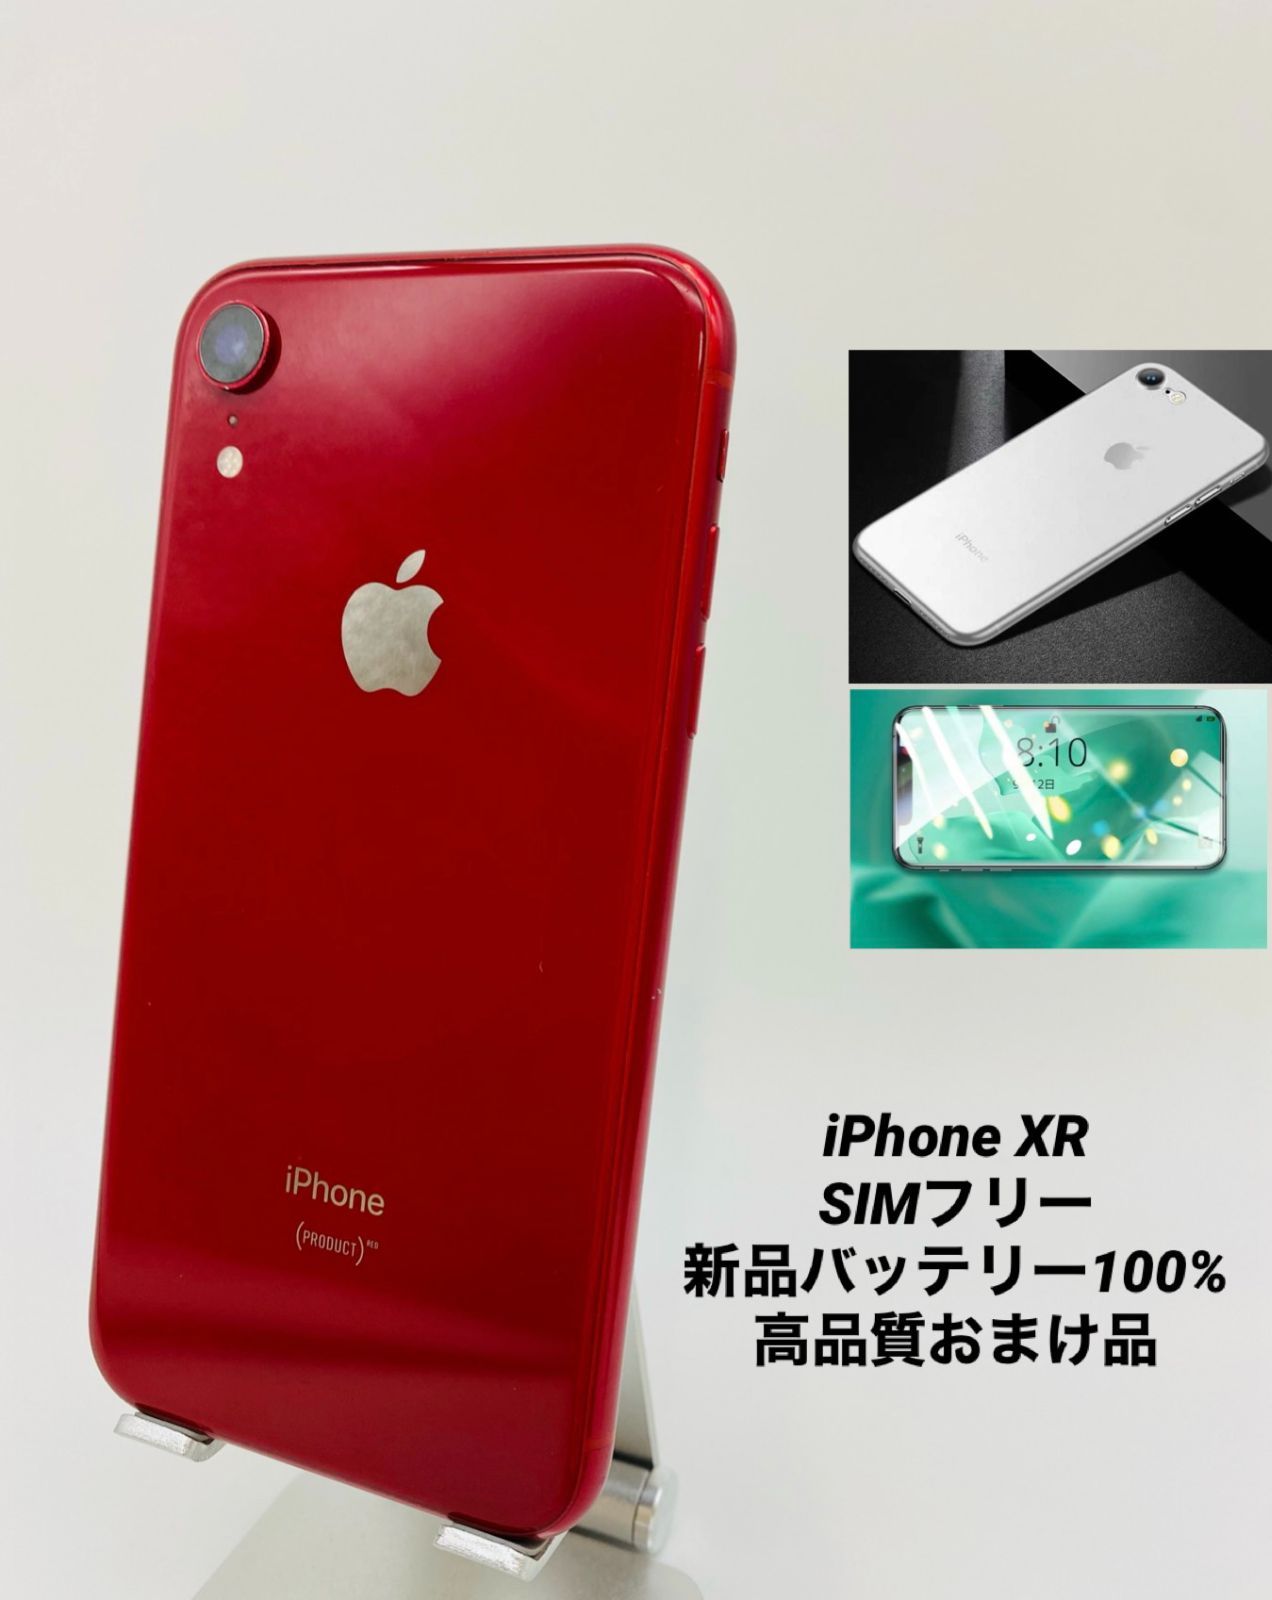 036 iPhone XR 64GB レッド/新品バッテリー100%-